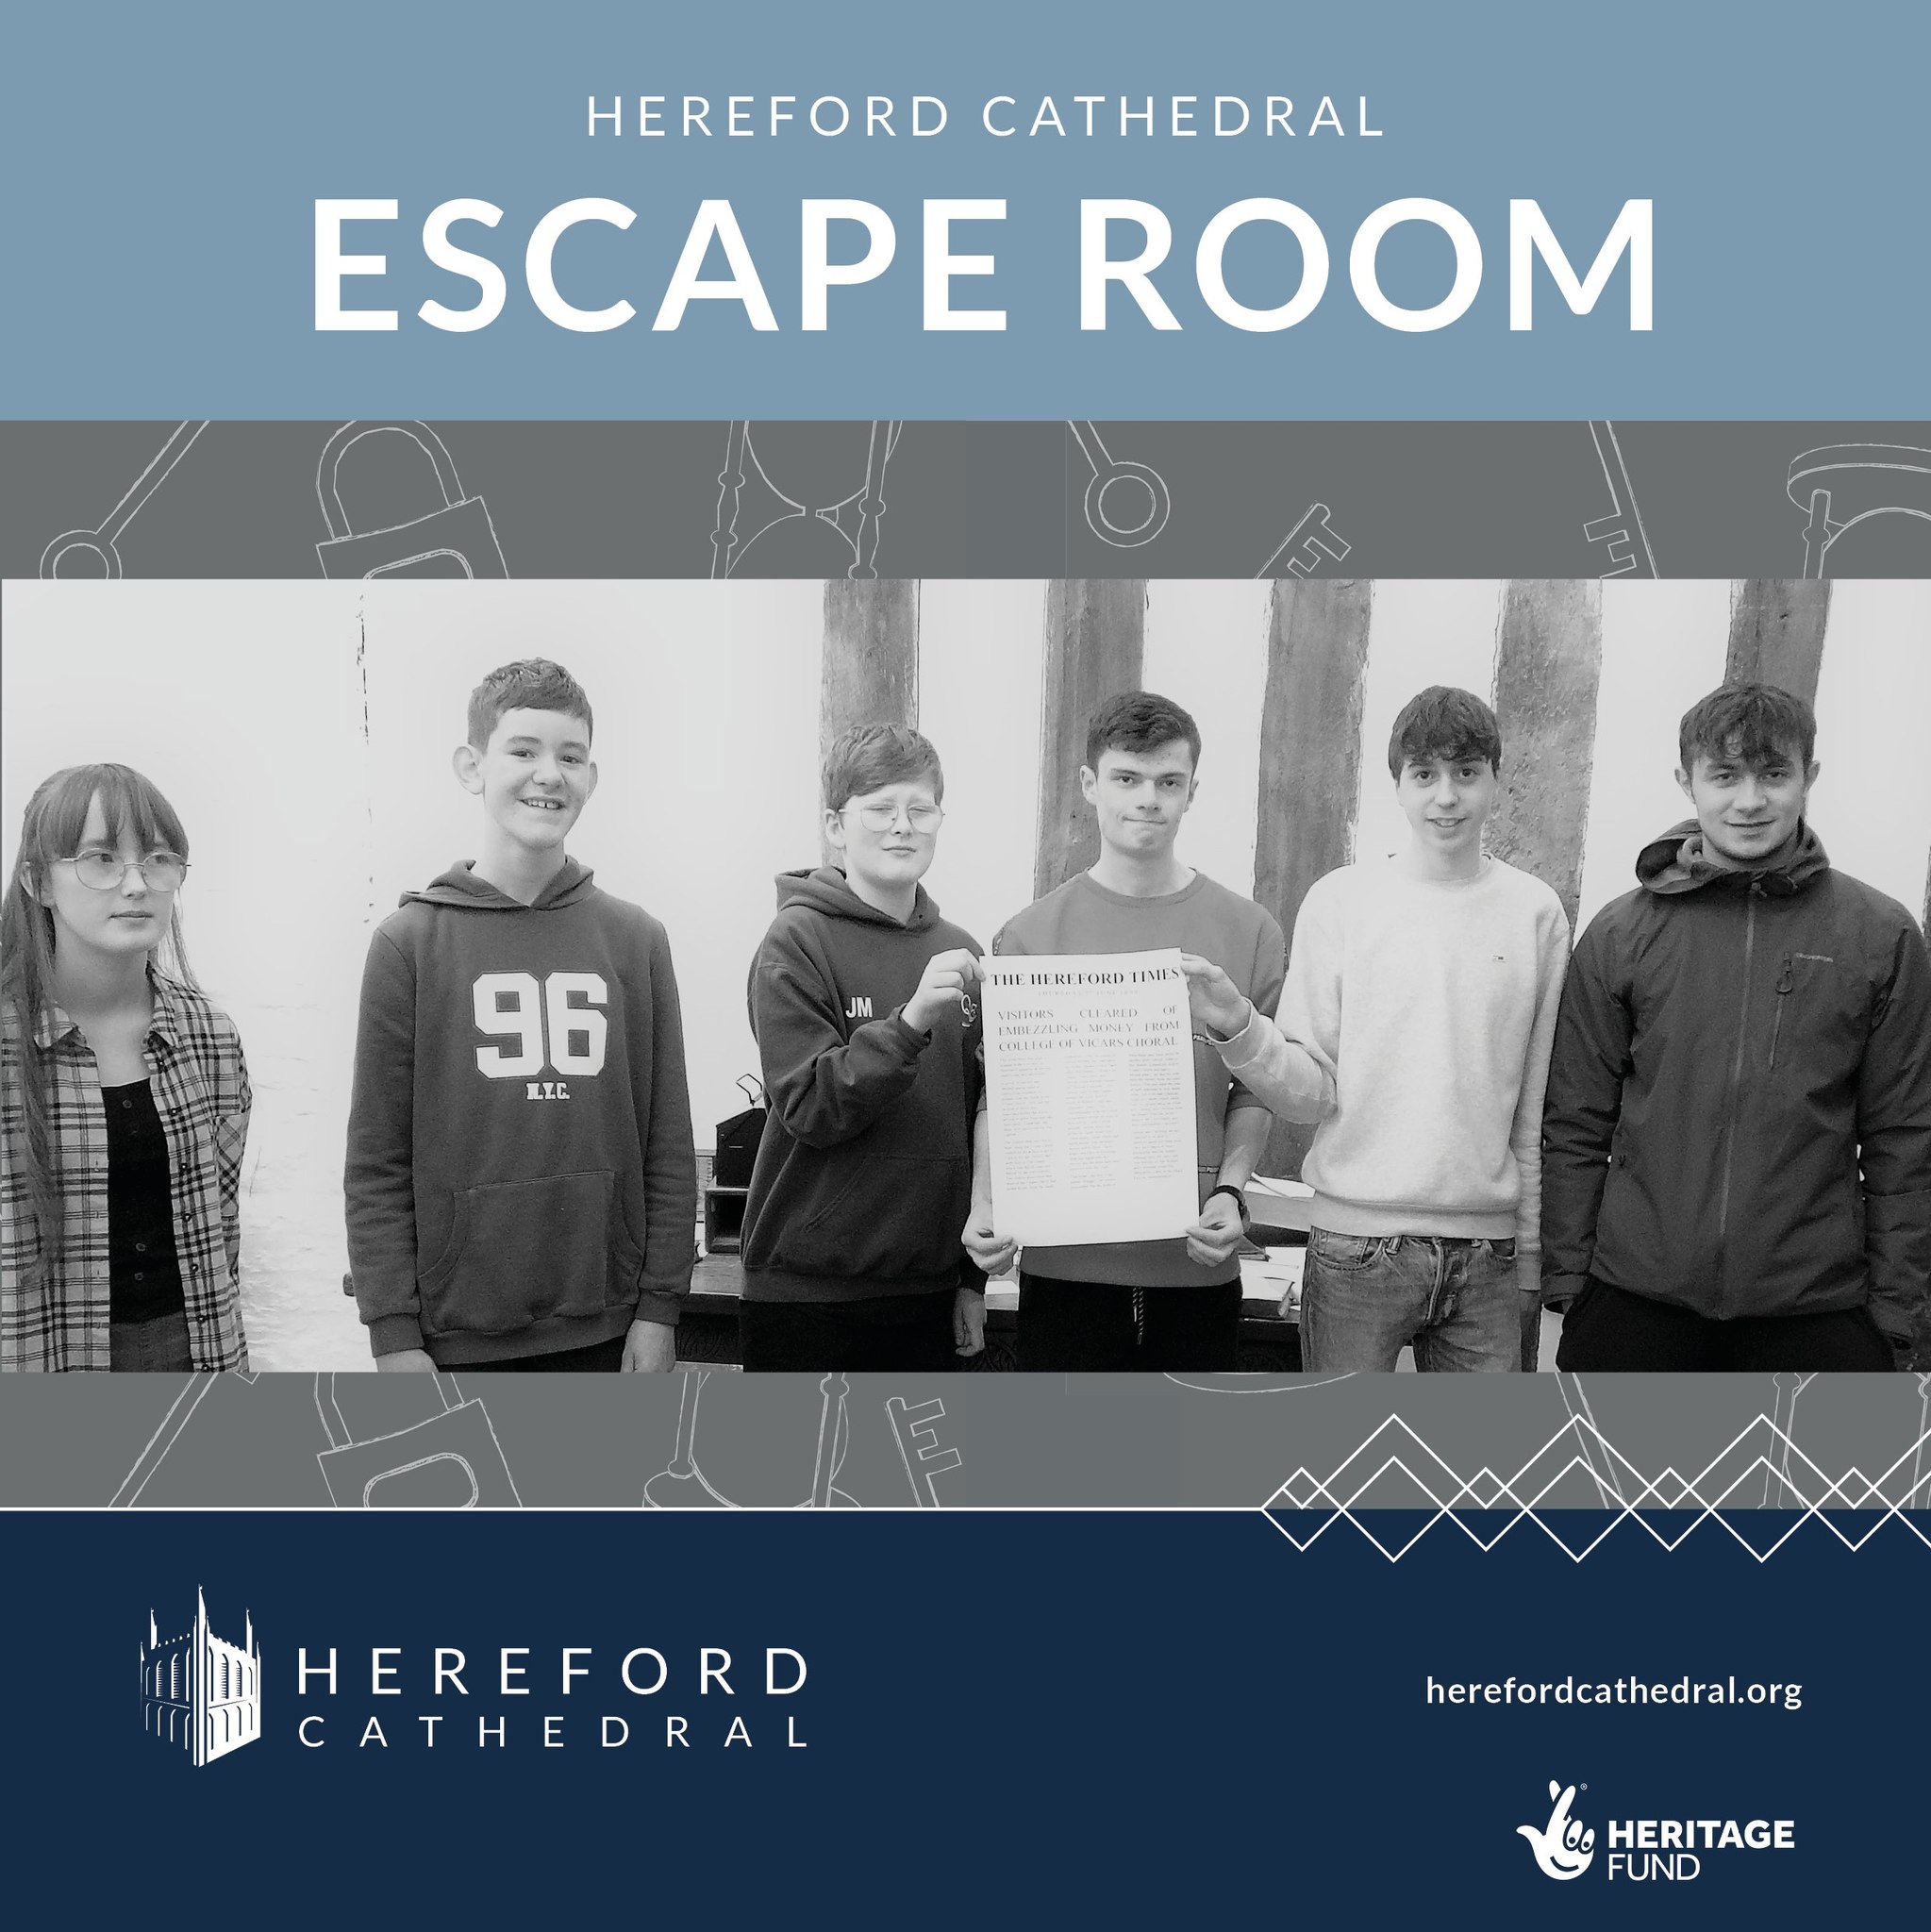 FEATURED | Excitement as Escape Room launched at Hereford Cathedral thanks to National Lottery funding